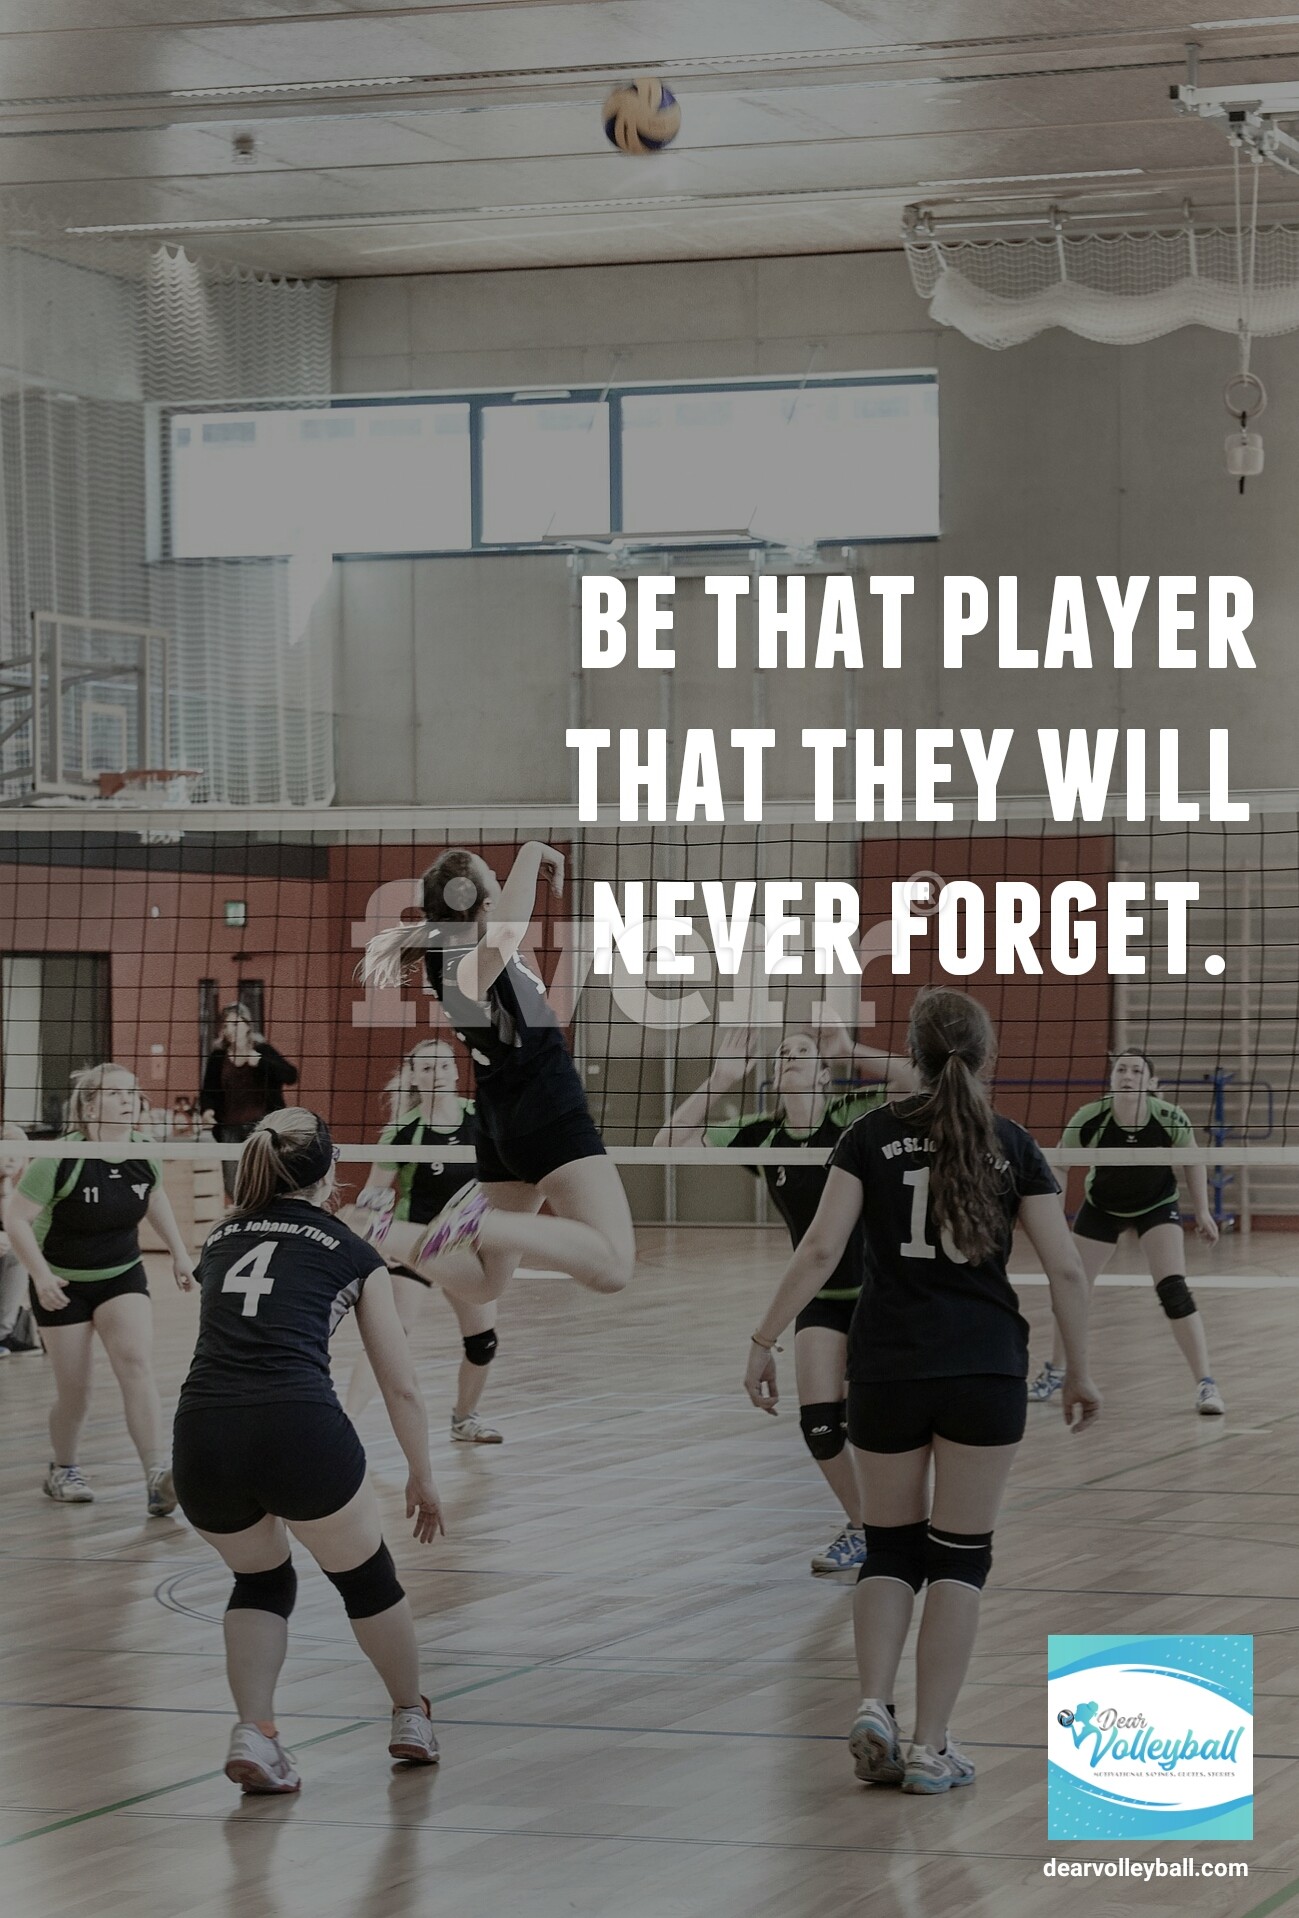 25 Quotes on Motivation with Inspiring Volleyball Pictures